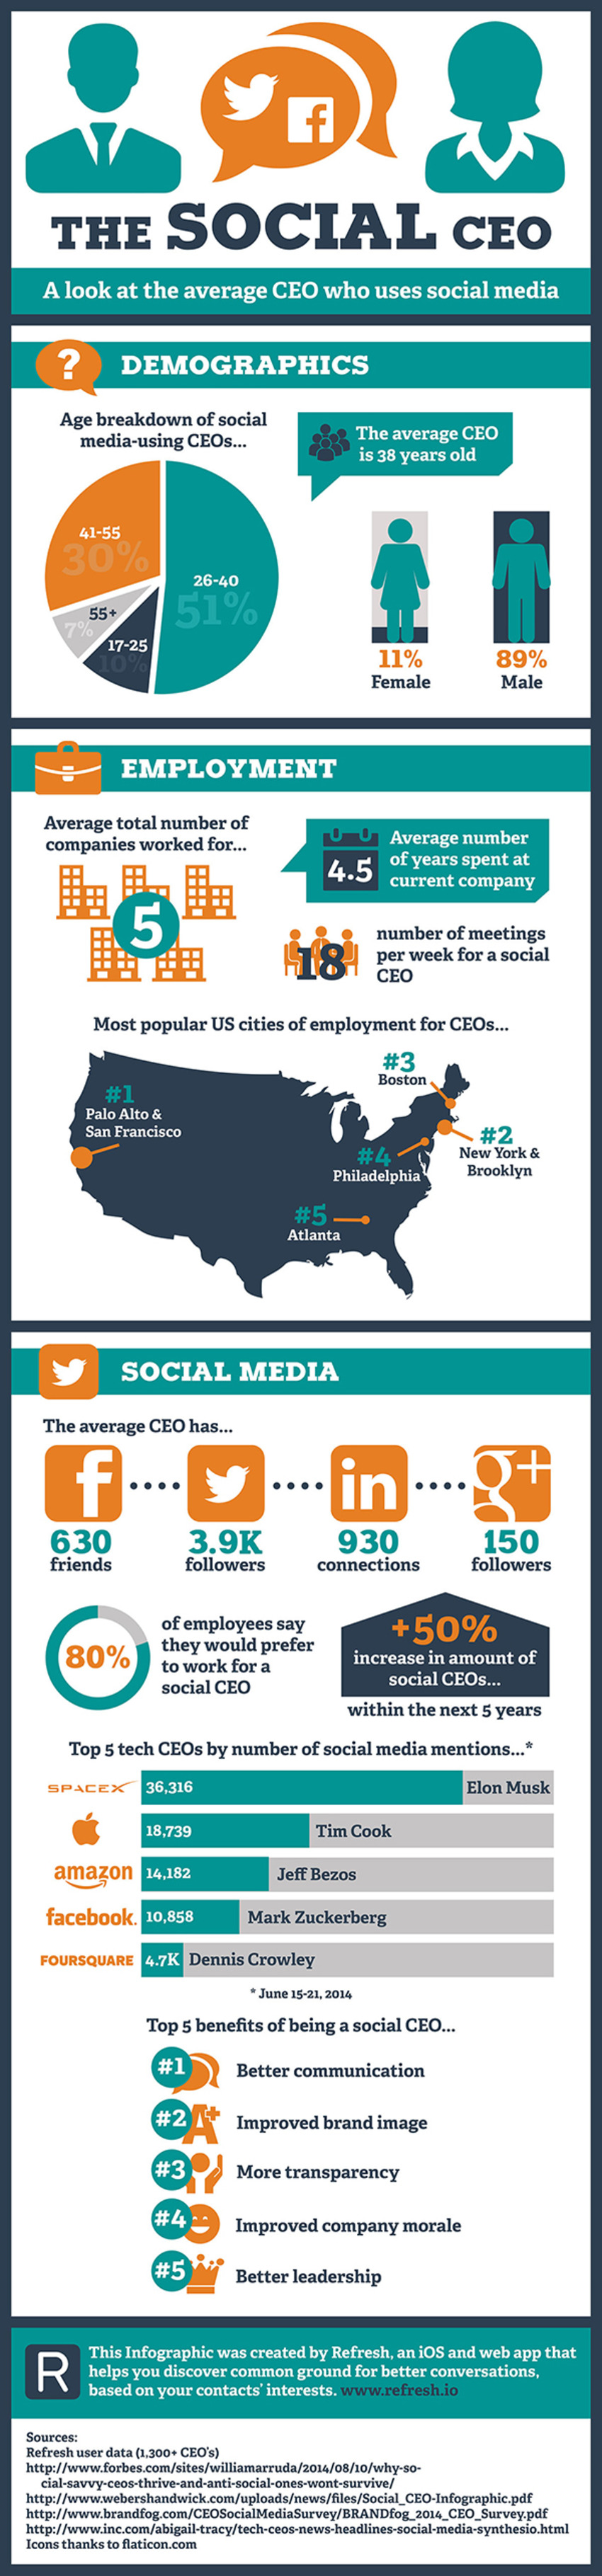 Infographic: Here's what a social CEO looks like - The Hub | The MarTech Digest | Scoop.it